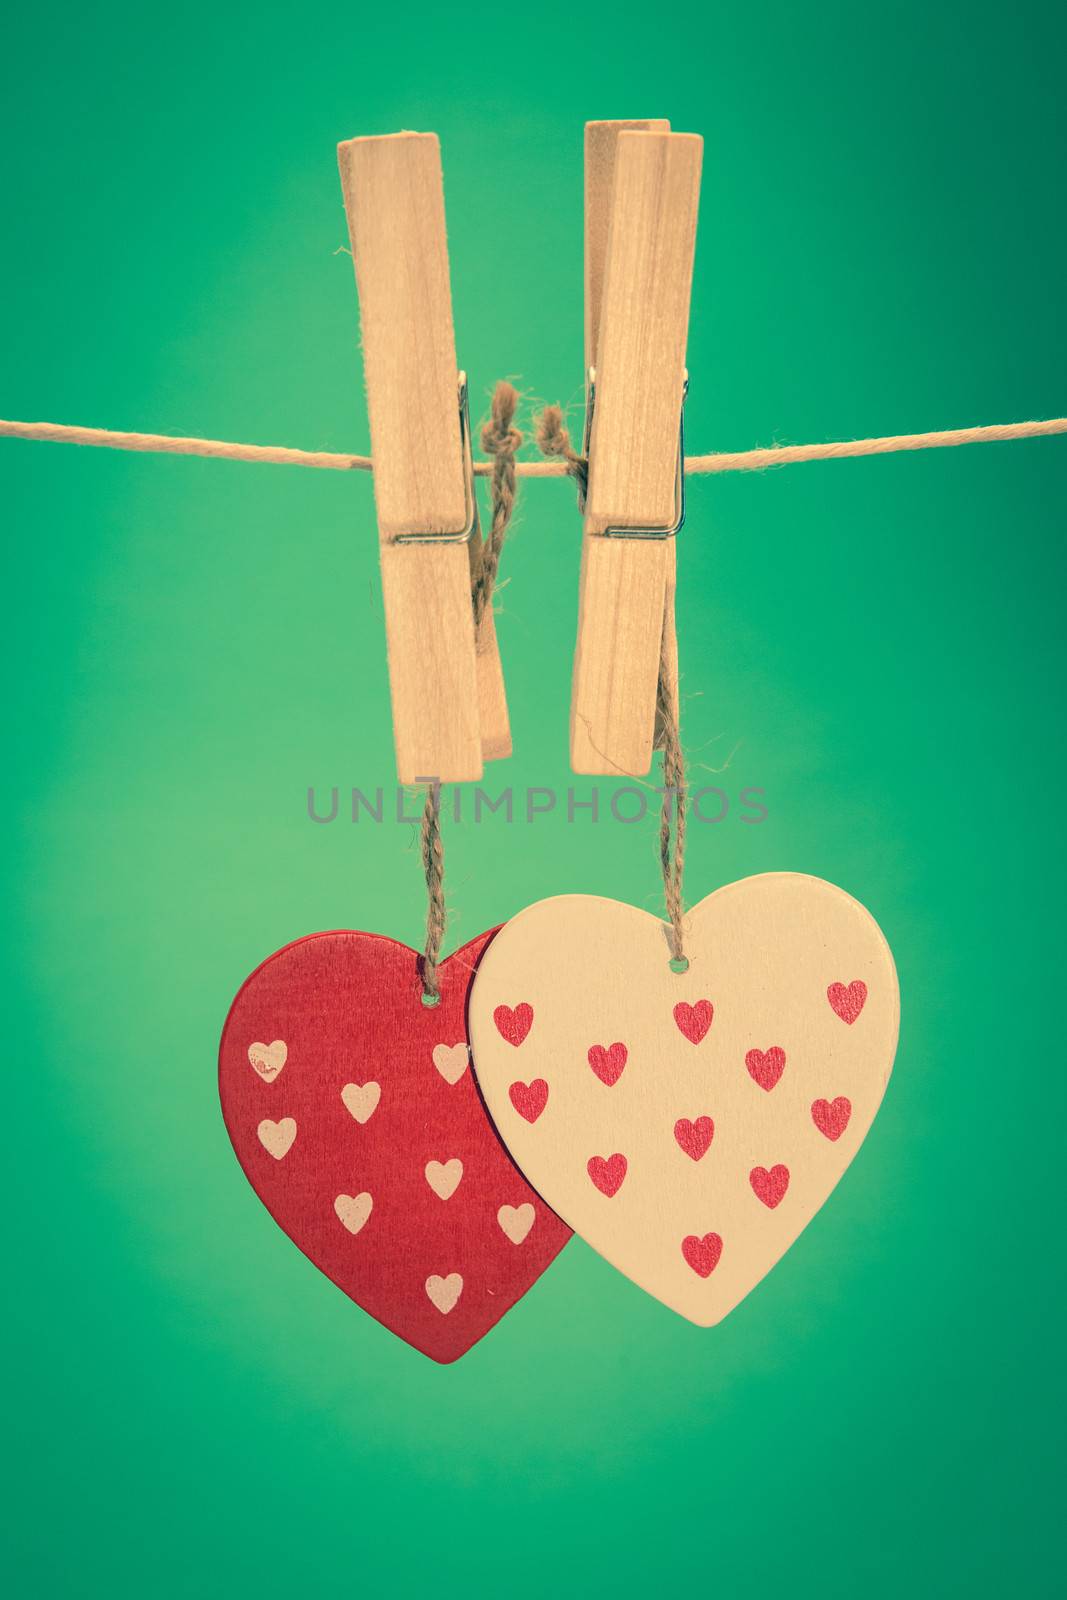 Two heart ornaments hanging from pegs on a line by Wavebreakmedia